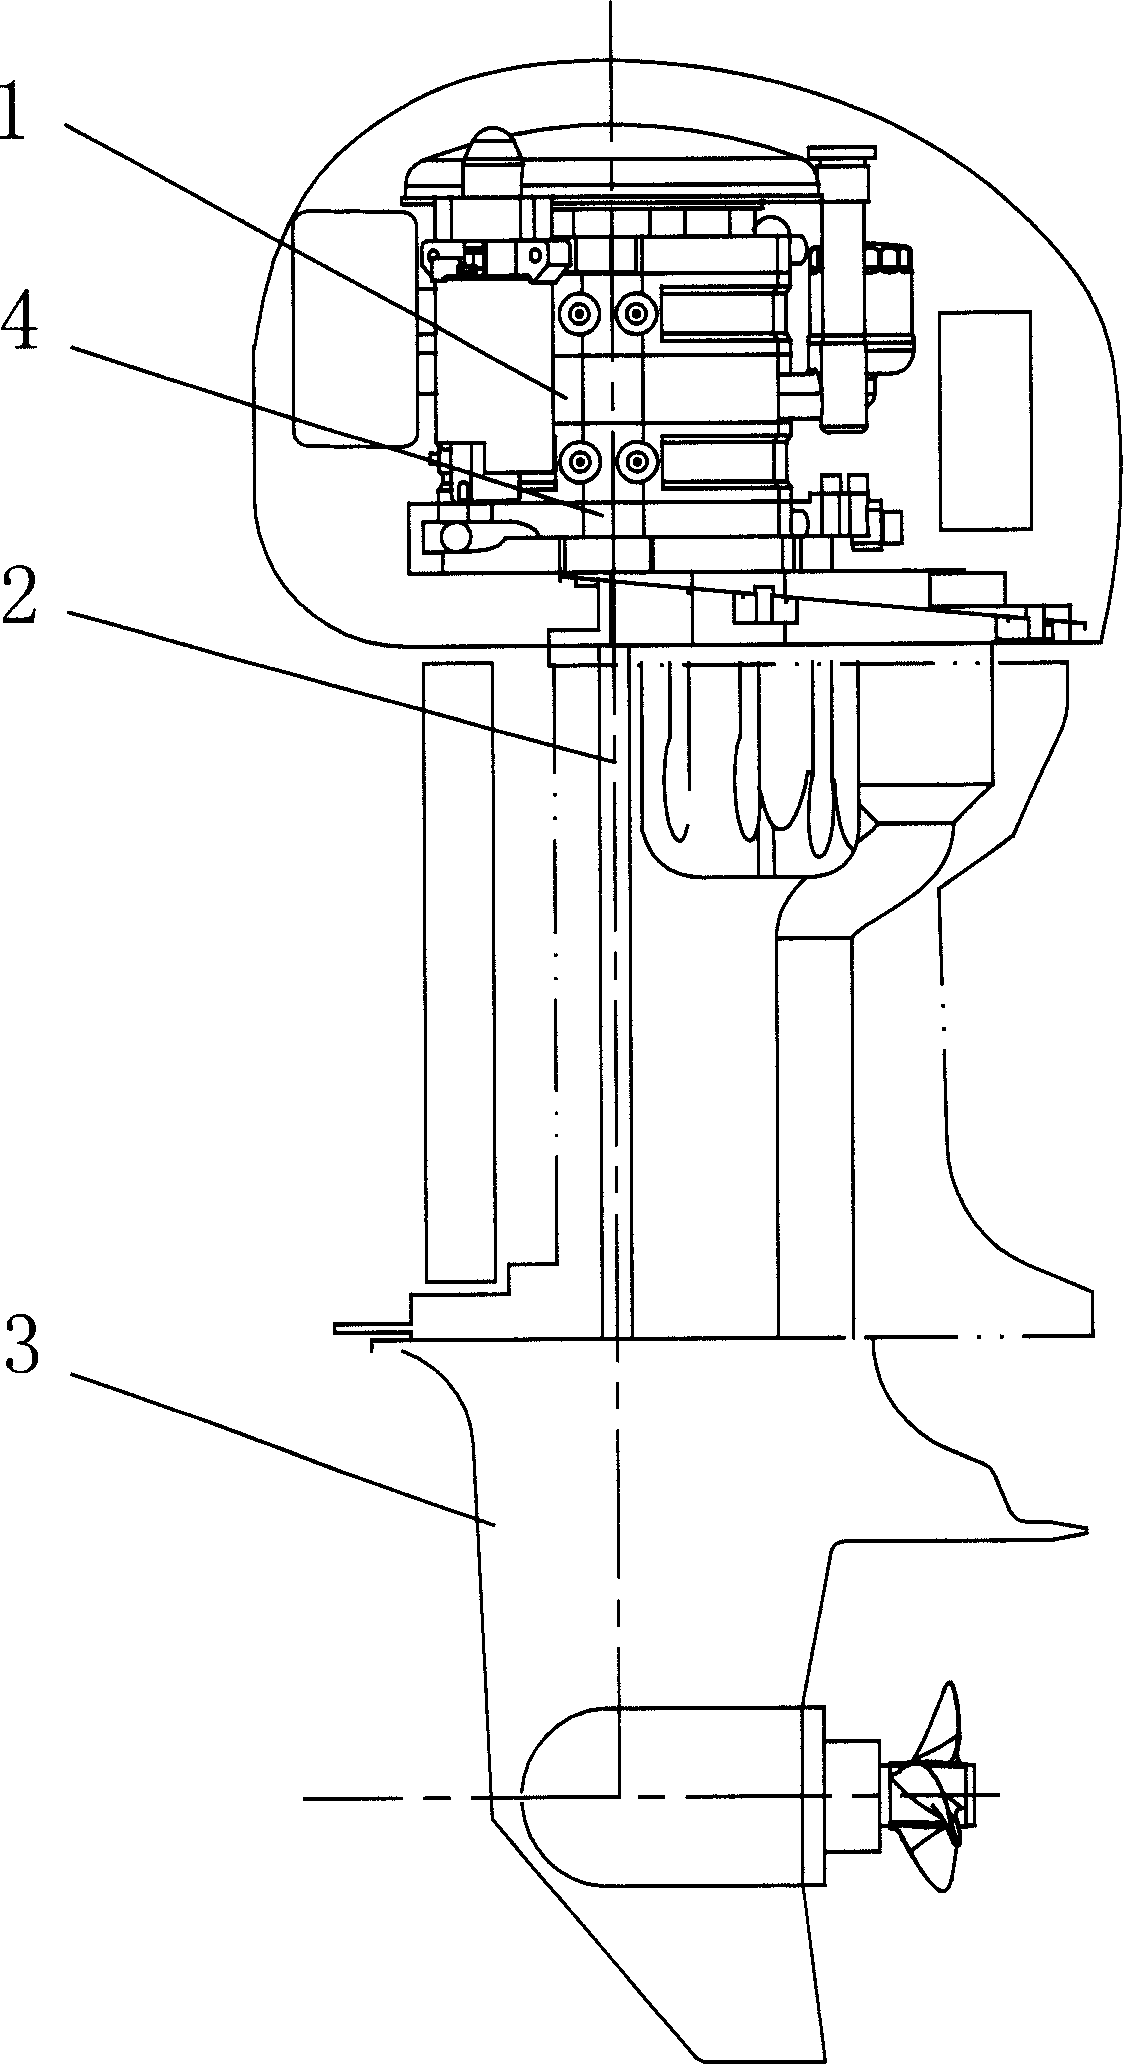 Outboard machine driven by triangle rotor engine